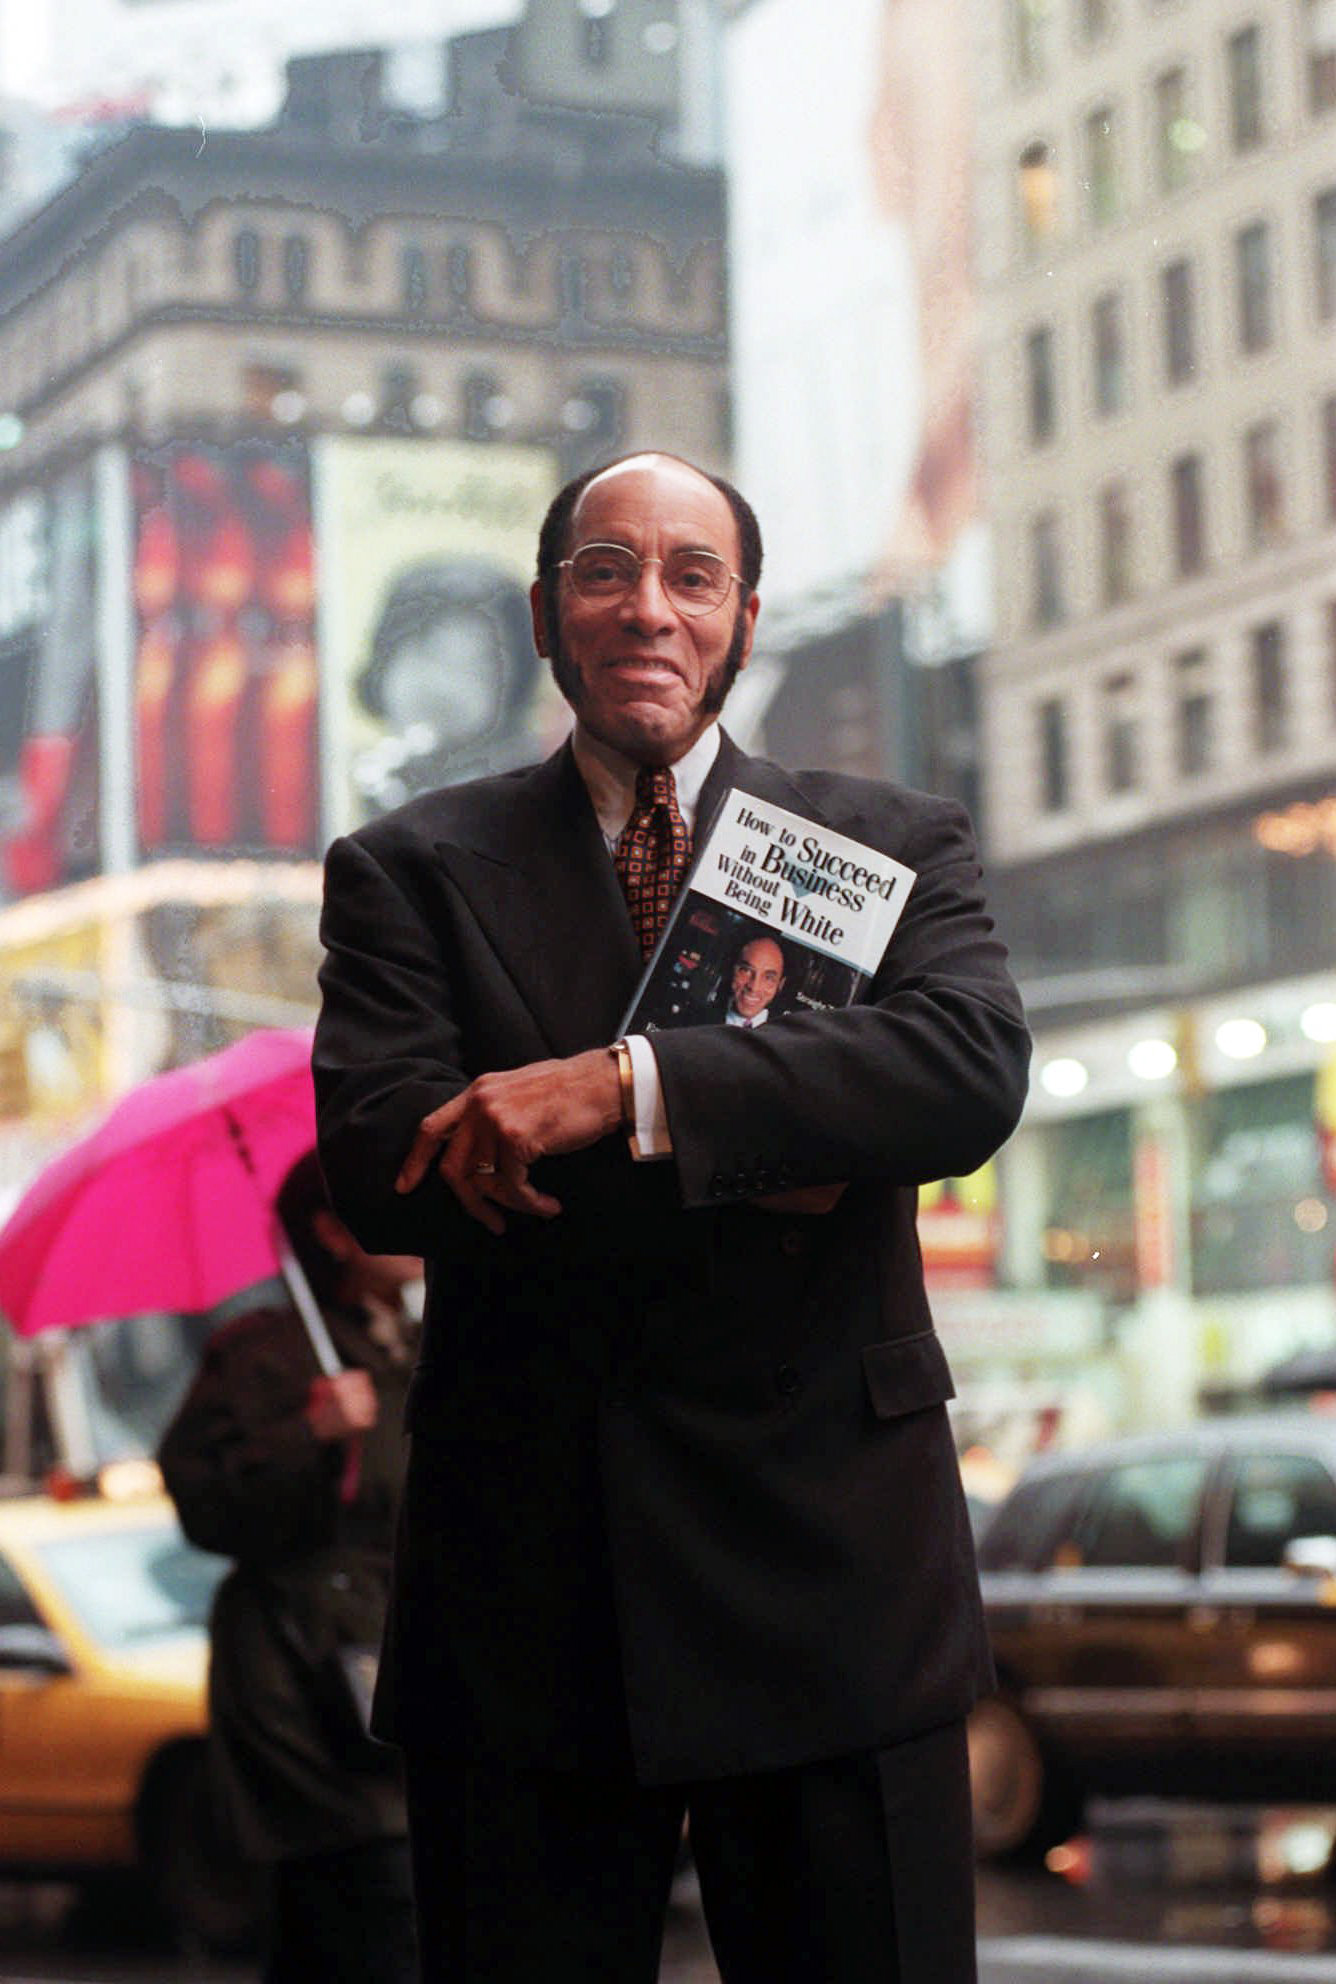 PHOTO: Publisher and CEO of Black Enterprise Magazine Earl G. Graves poses with his book "How To Succeed In Business Without Being White" in Times Square in New York, April 17, 1997.